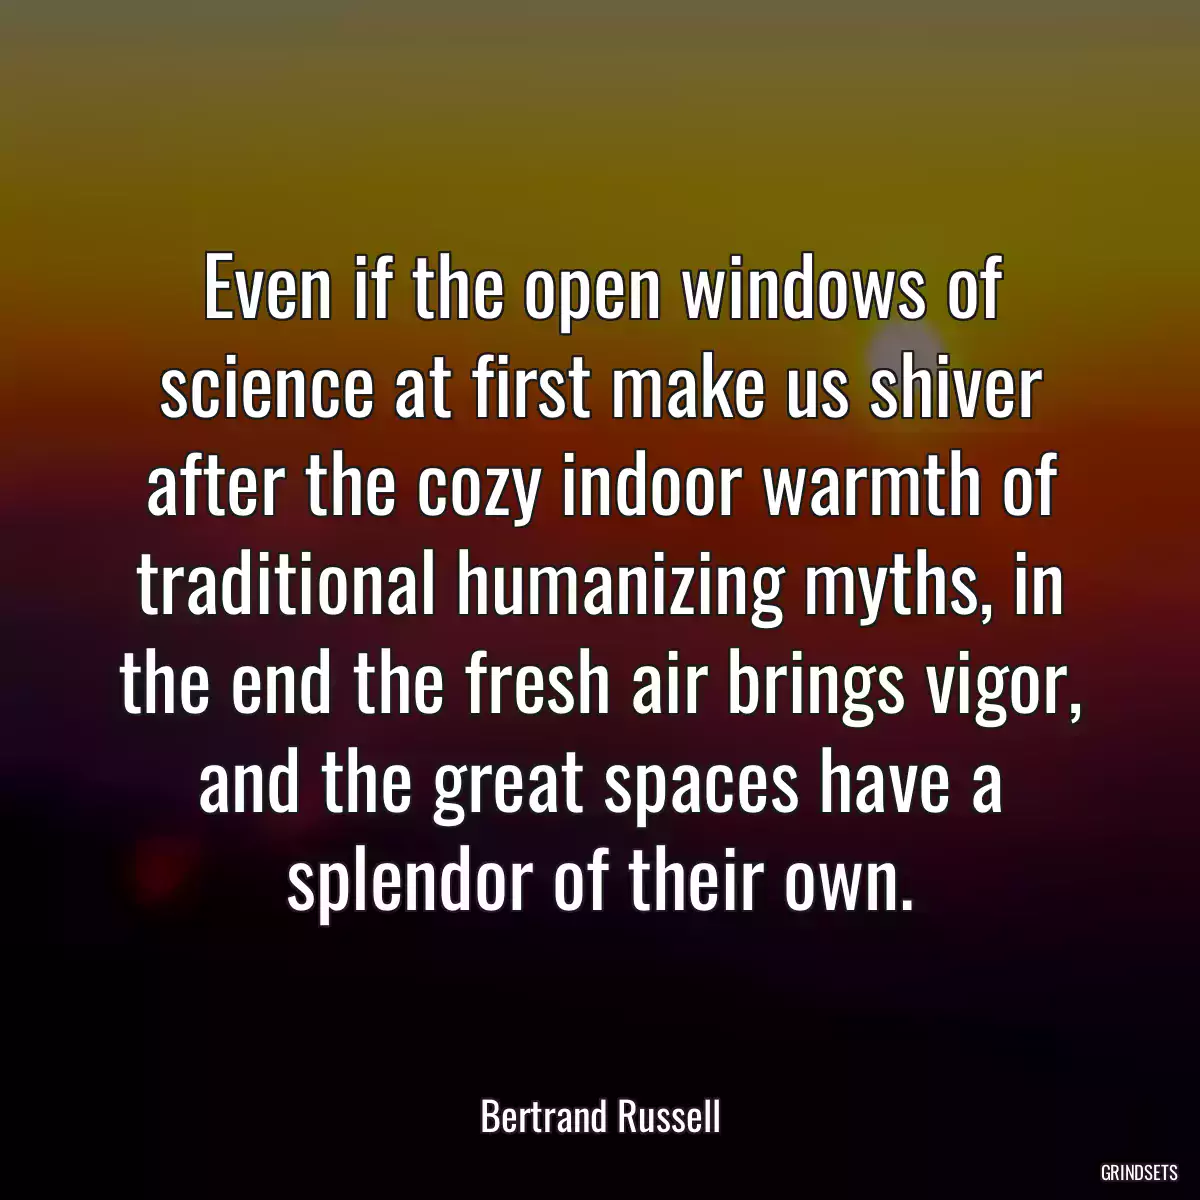 Even if the open windows of science at first make us shiver after the cozy indoor warmth of traditional humanizing myths, in the end the fresh air brings vigor, and the great spaces have a splendor of their own.